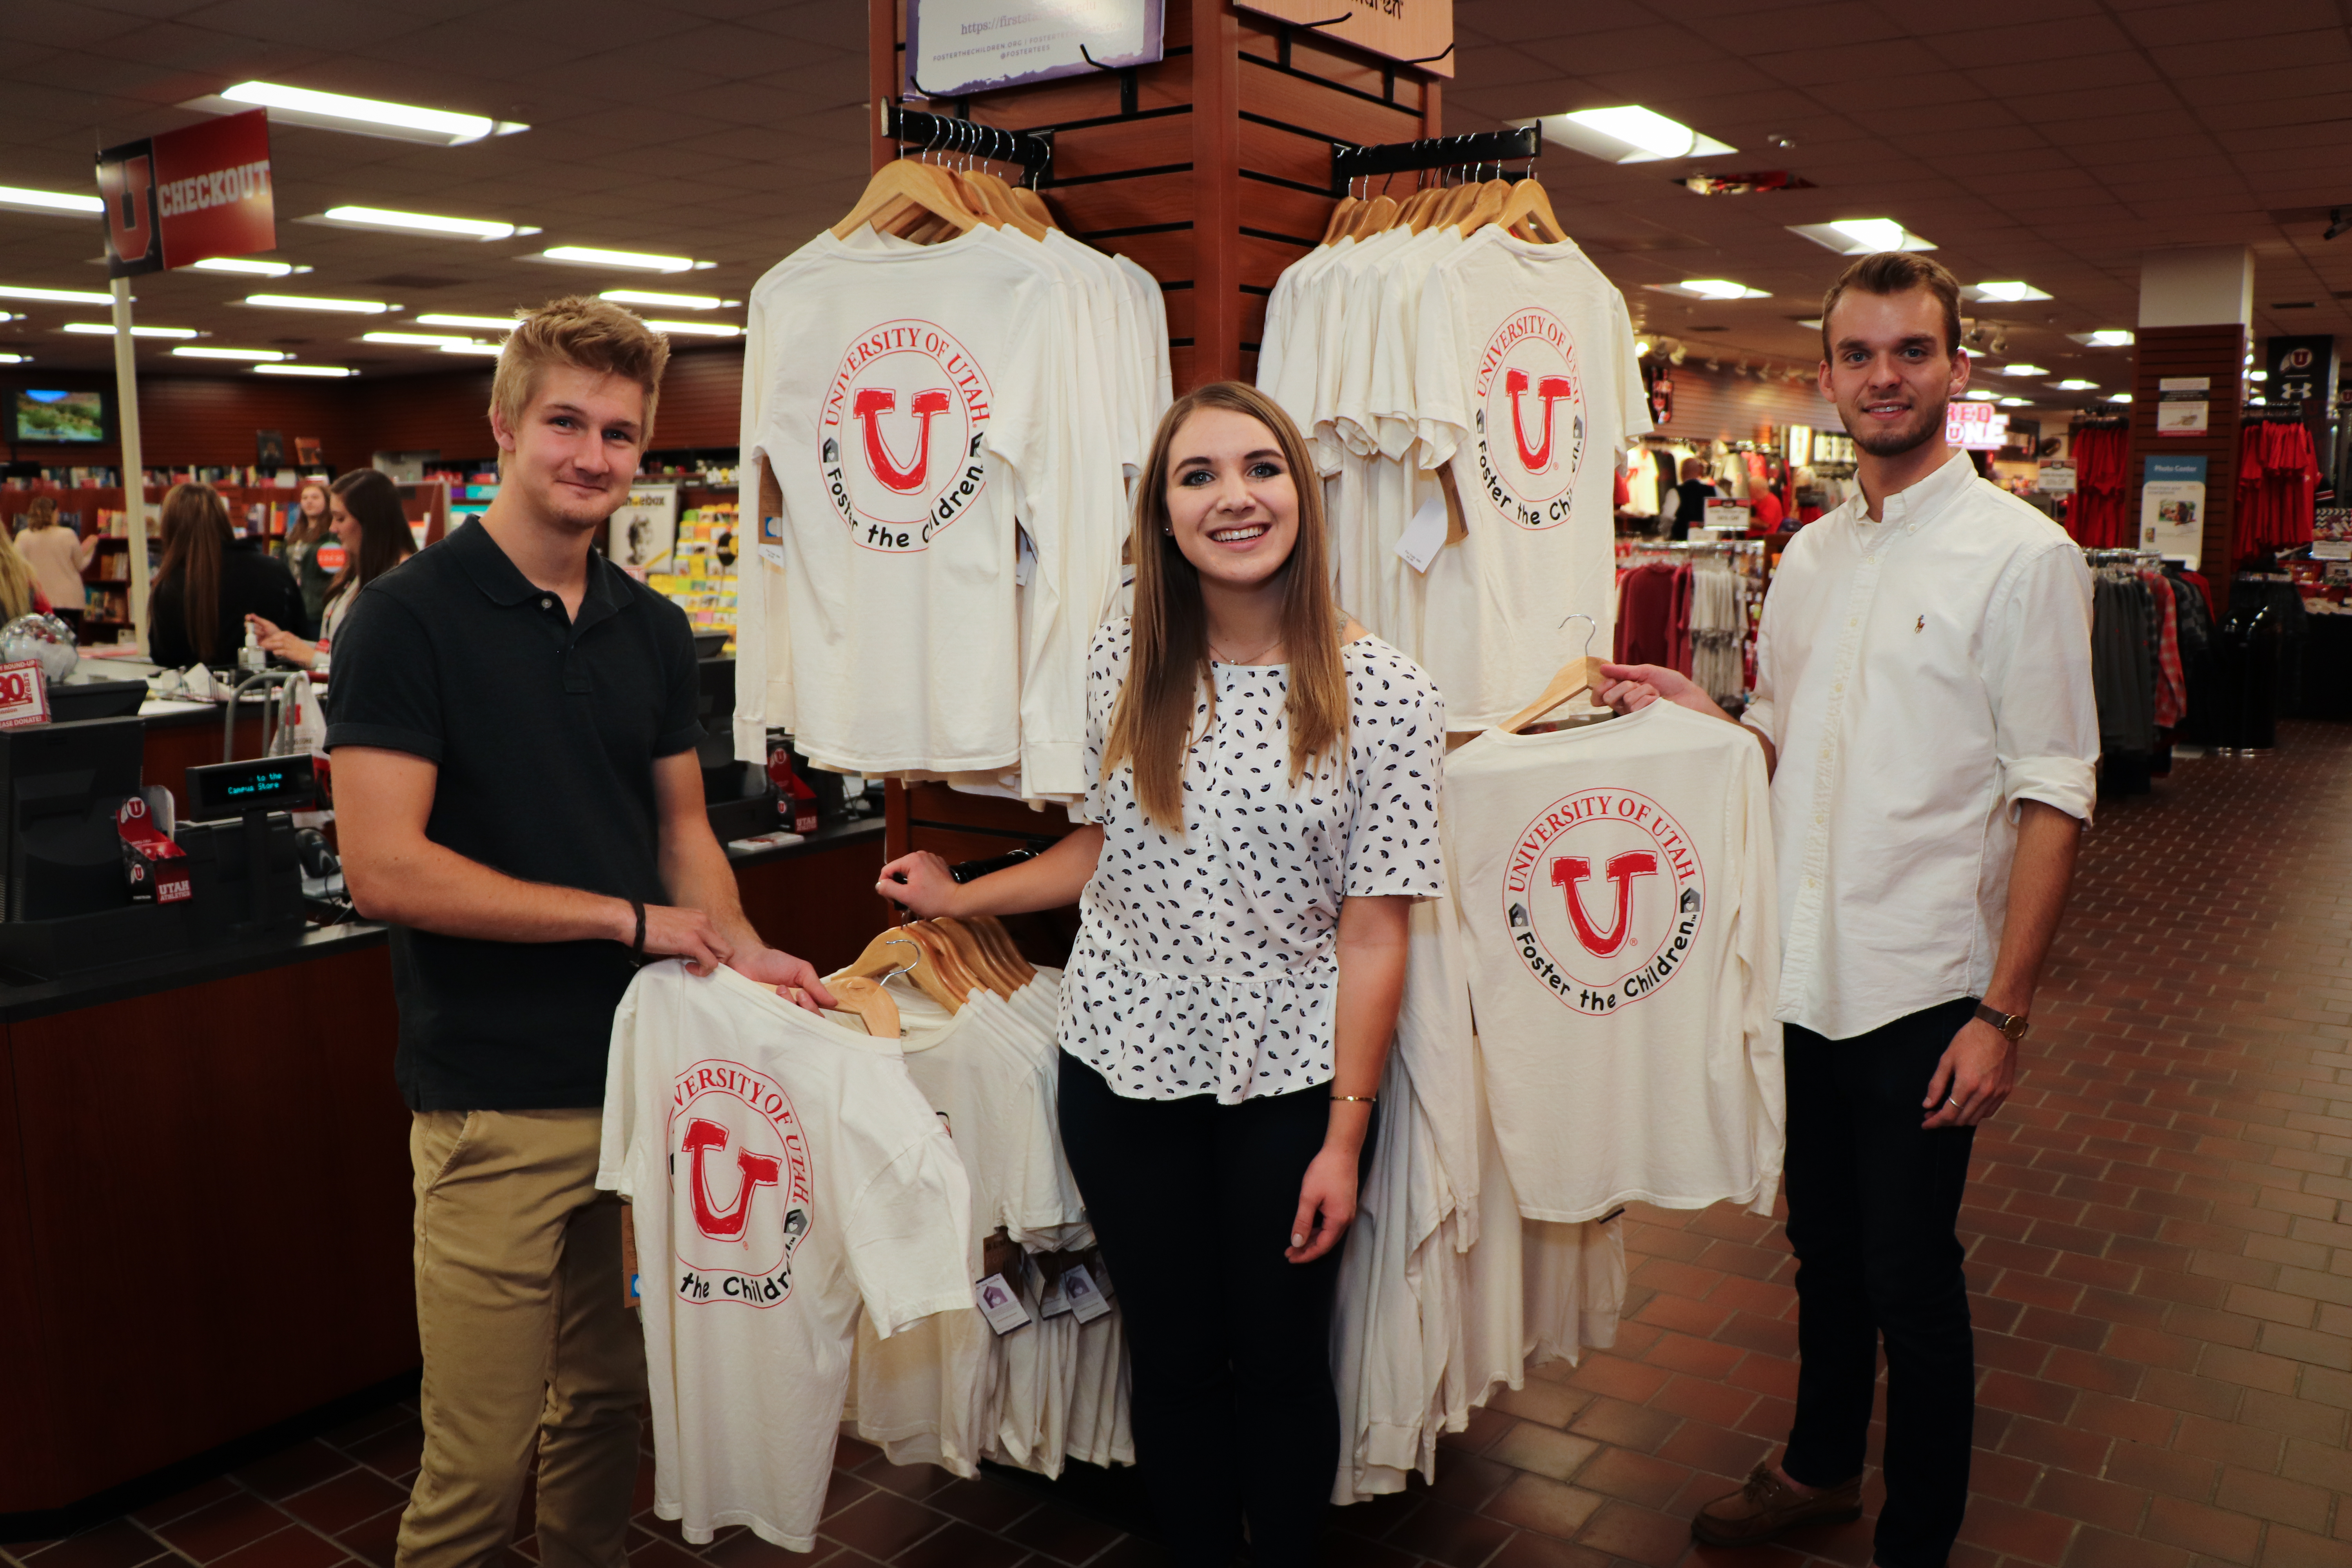 Megan Pollard poses with T-shirts from her company Foster the Children.